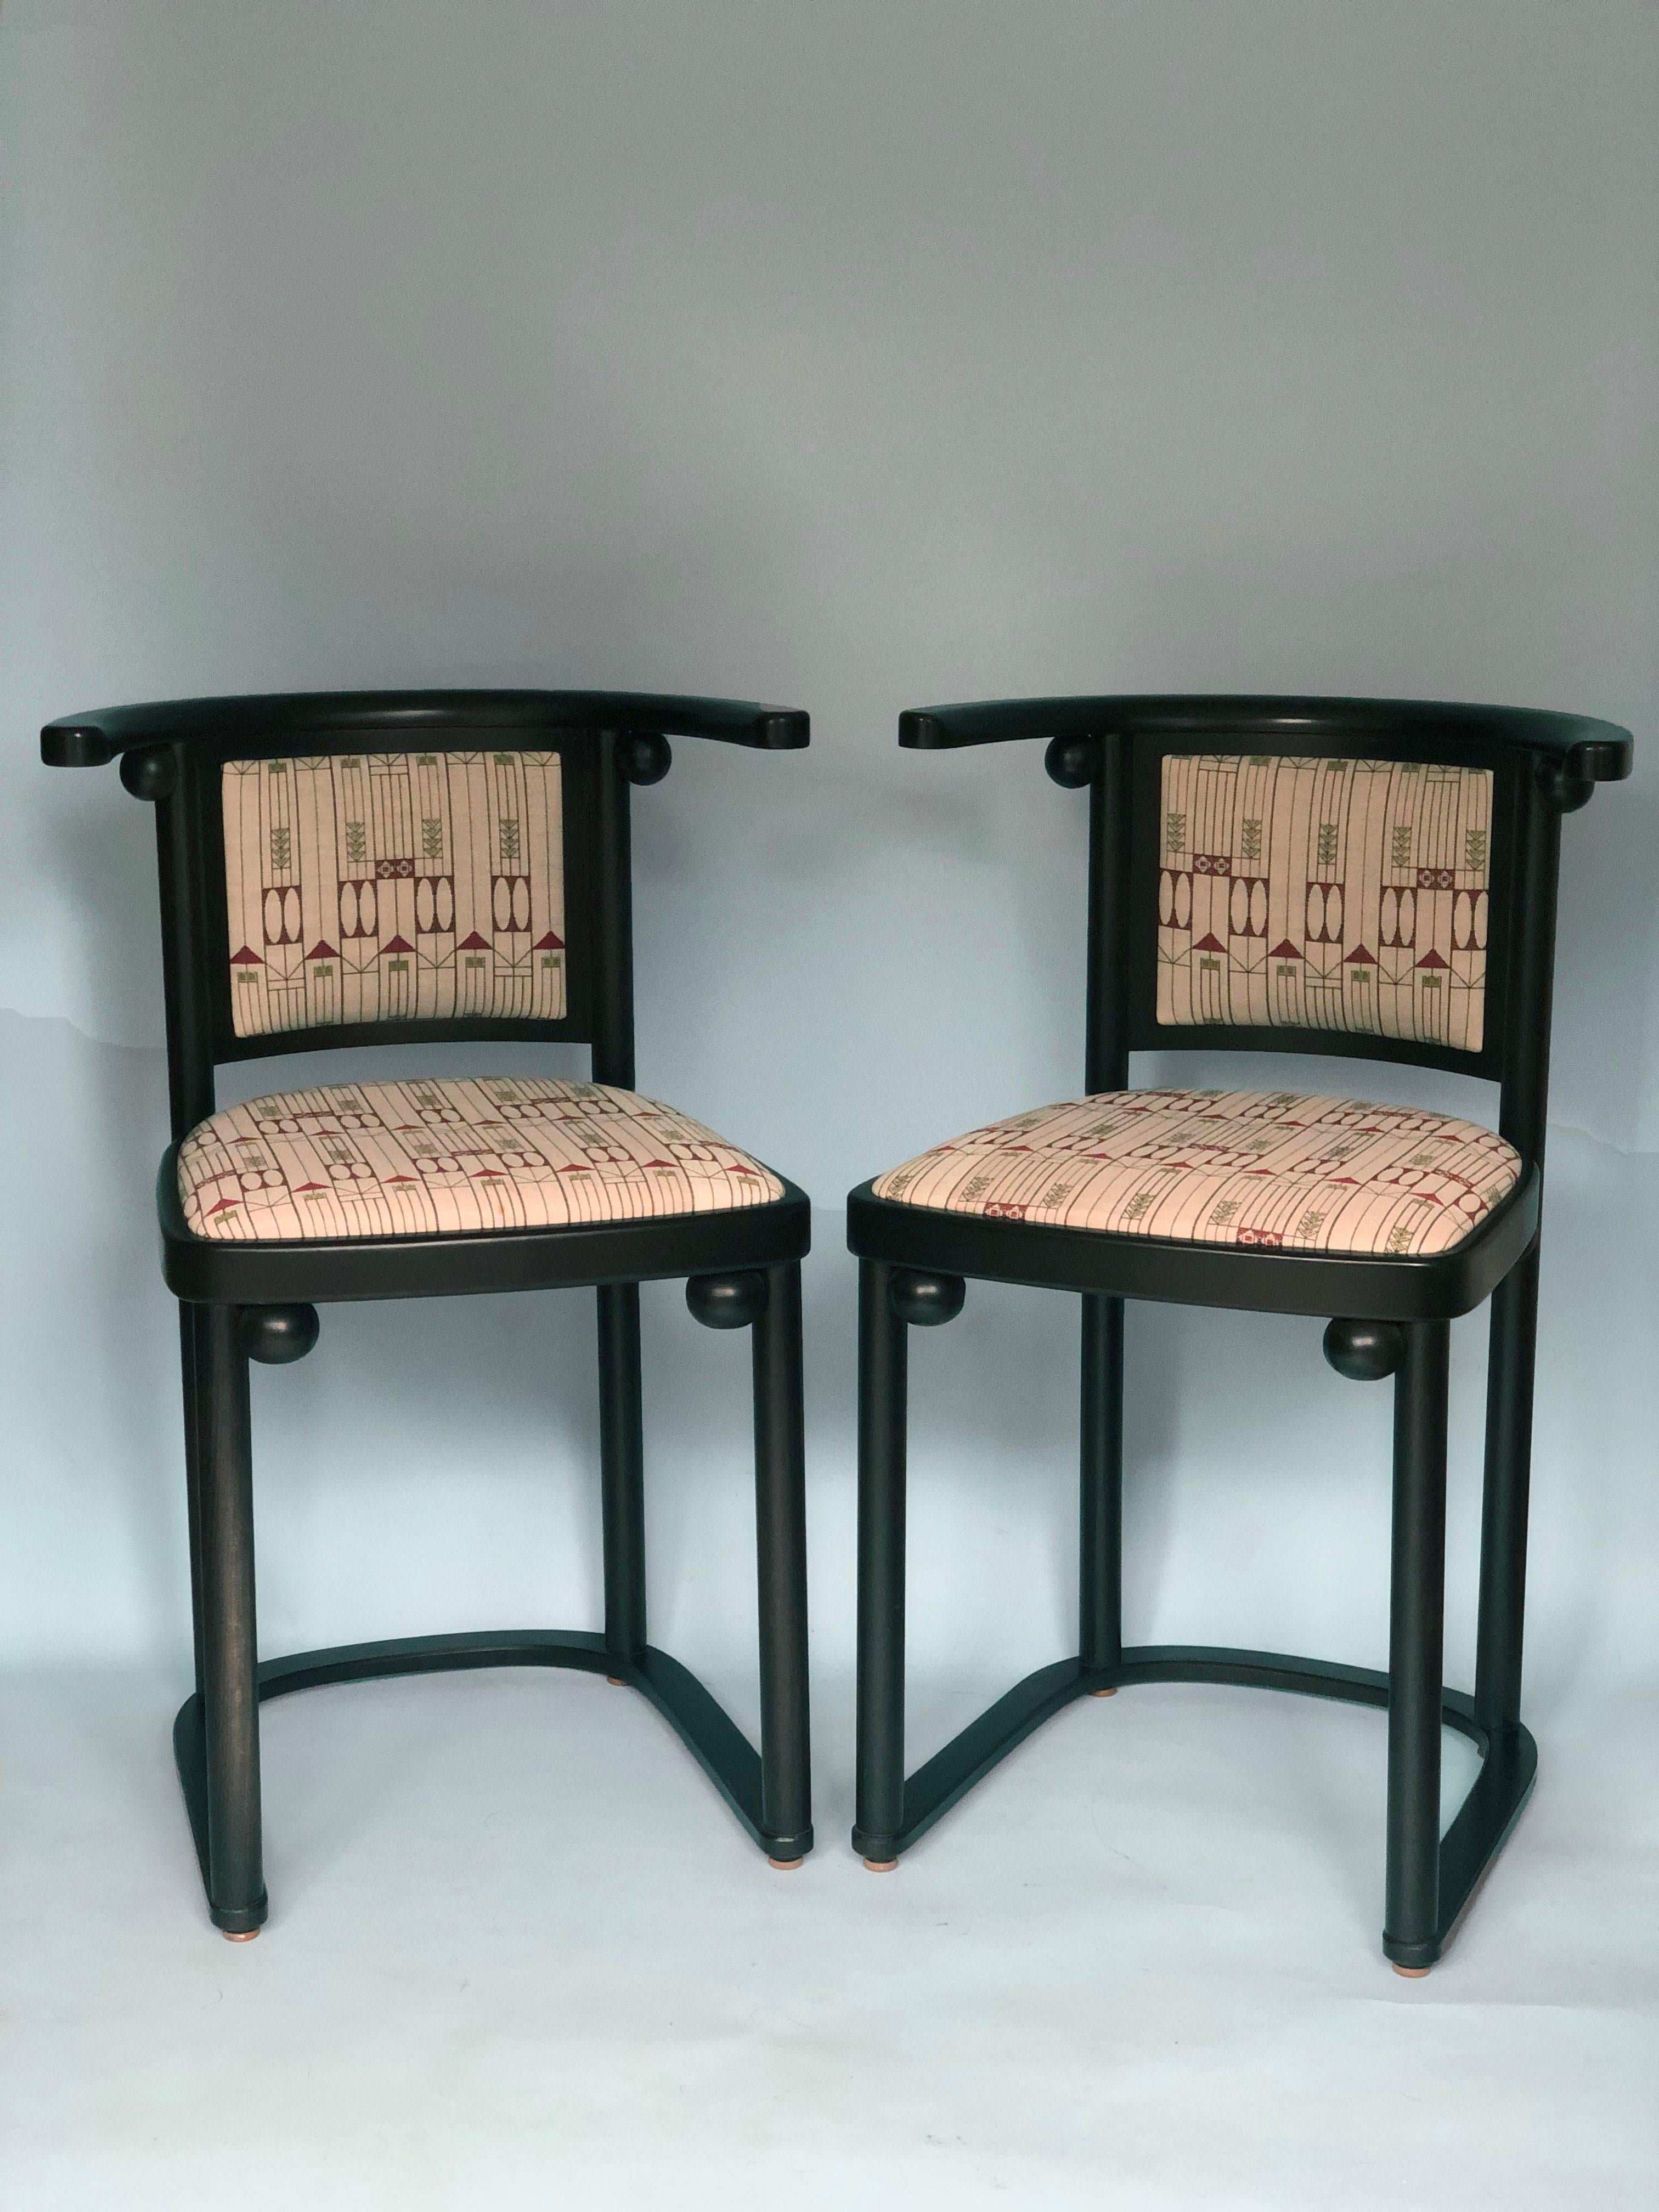 A Standout Interior design piece. These chairs were specially designed by Josef Hoffmann for the Cabaret Fledermaus in Vienna, 1907. For the time the design was a bold and radical departure from the gilded tradition of European nightclubs and